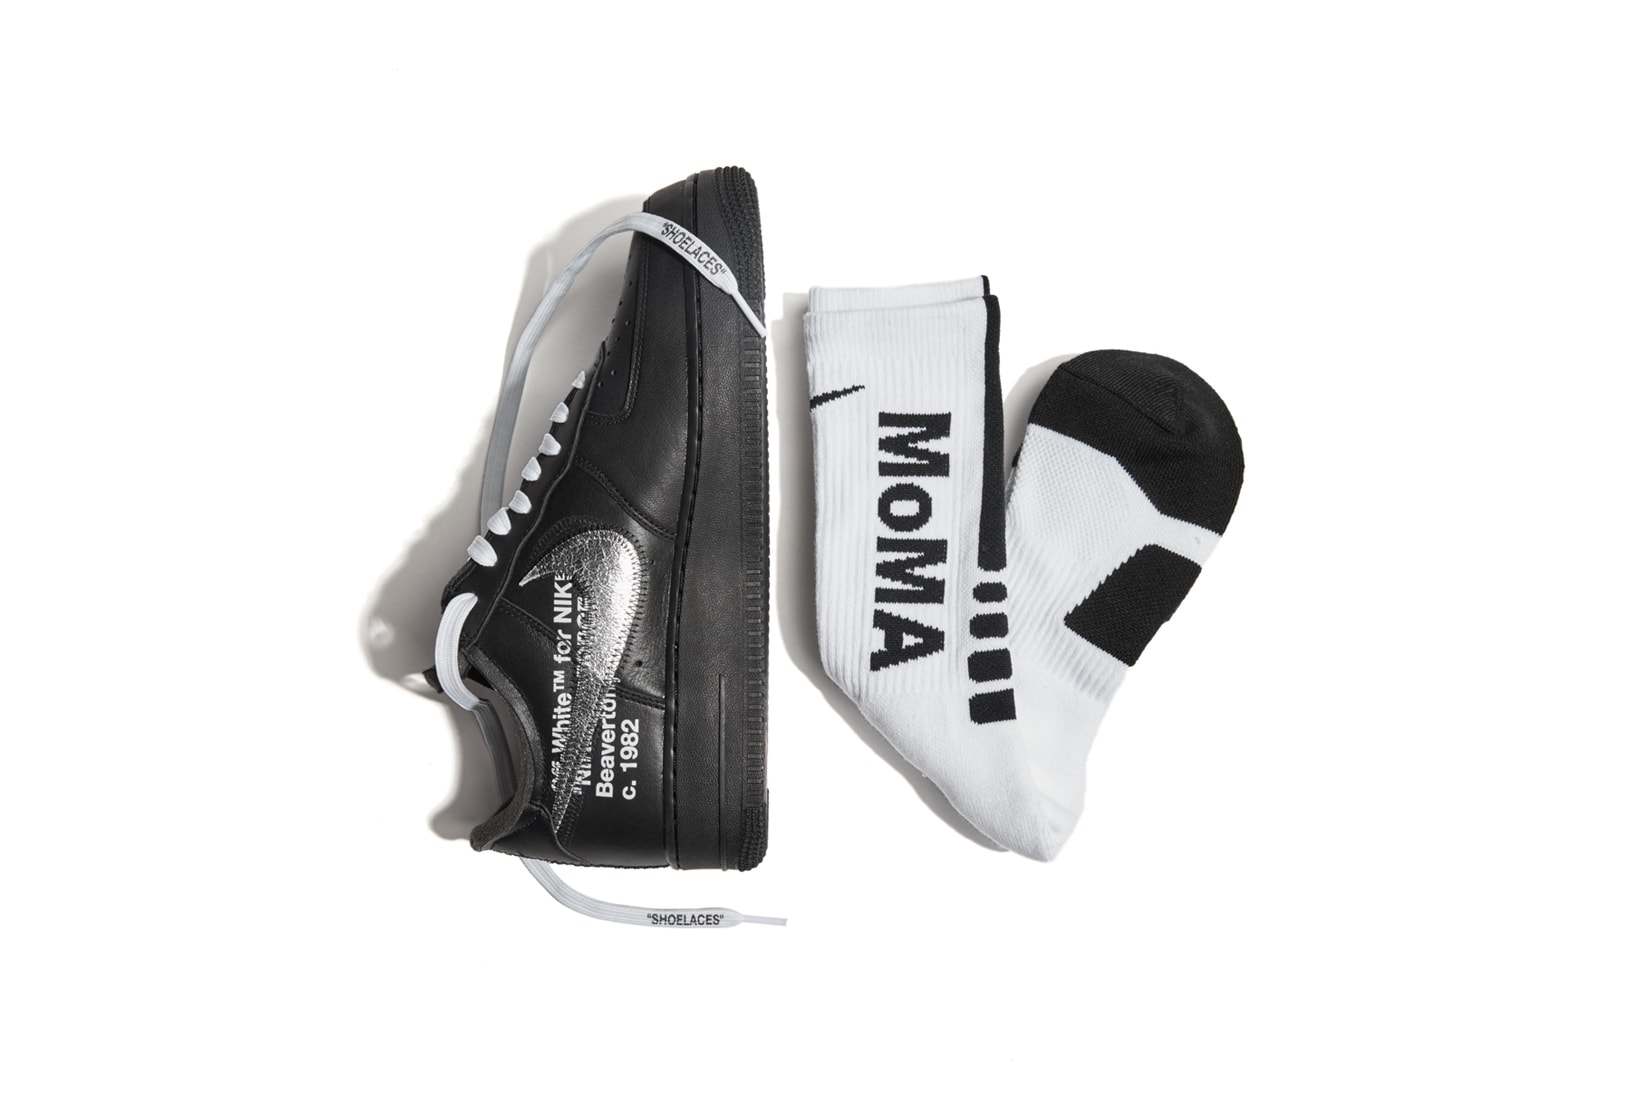 Off-White™ by Virgil Abloh for MoMa x Nike Air Force 1 in Black Elite Sock